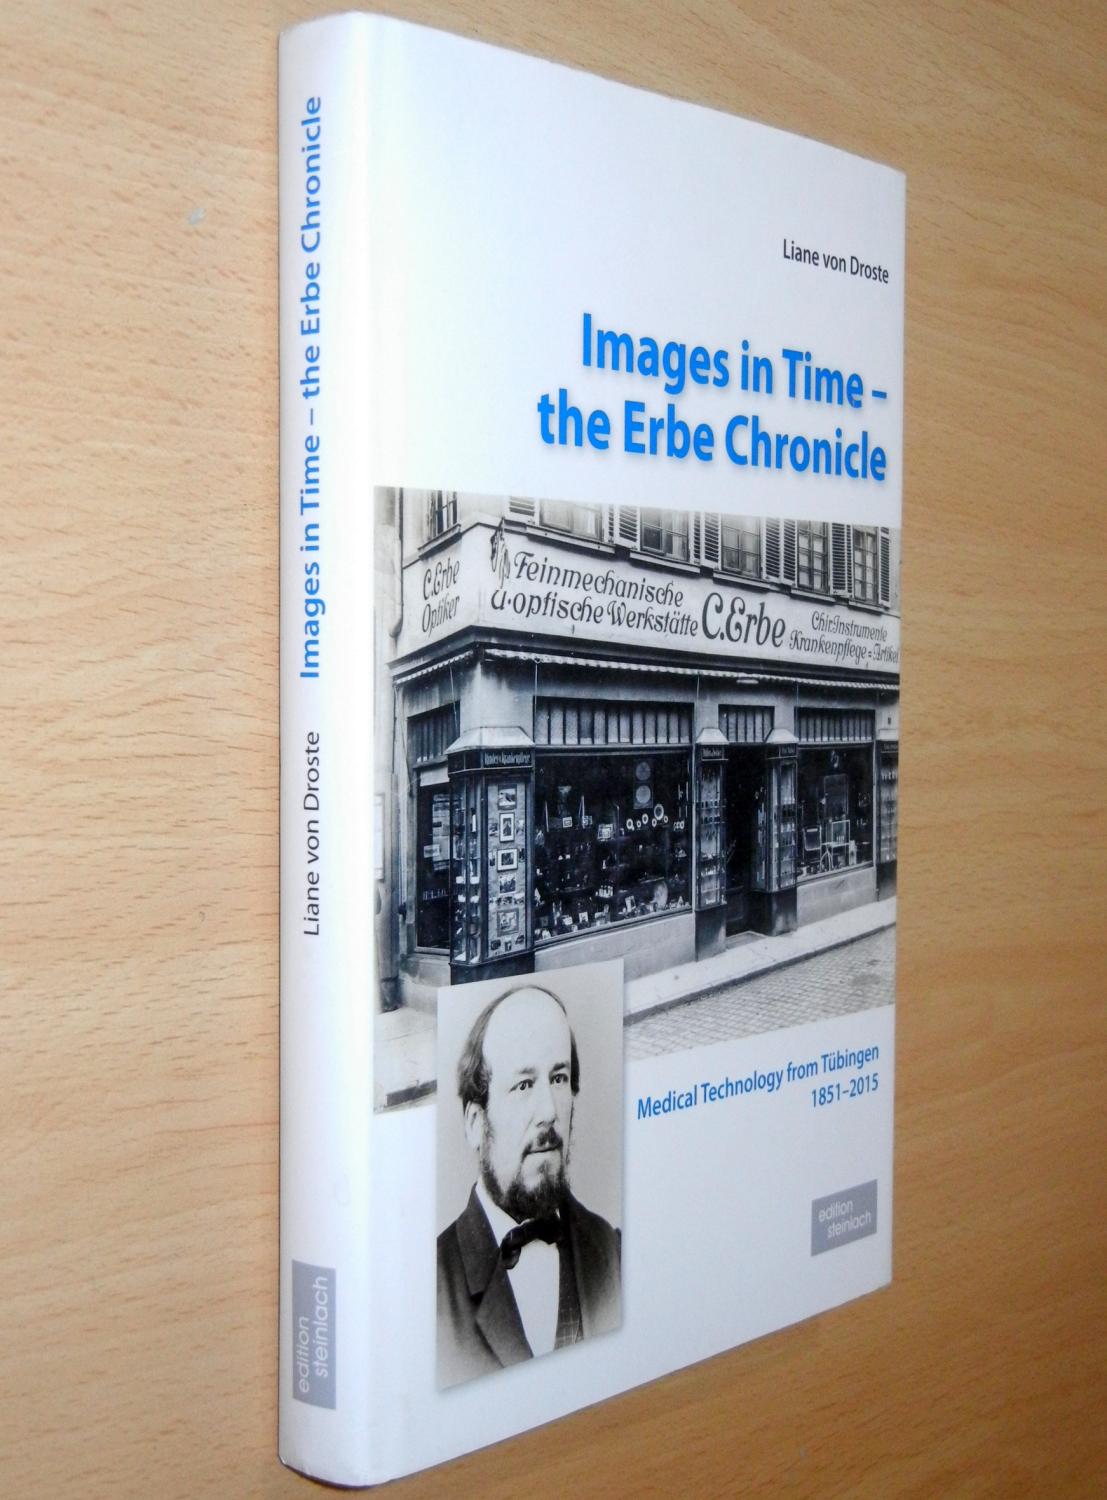 Images in Time - the Erbe Chronicle: Medical Technology from Tübingen 1851 - 2015 - von Droste, Liane